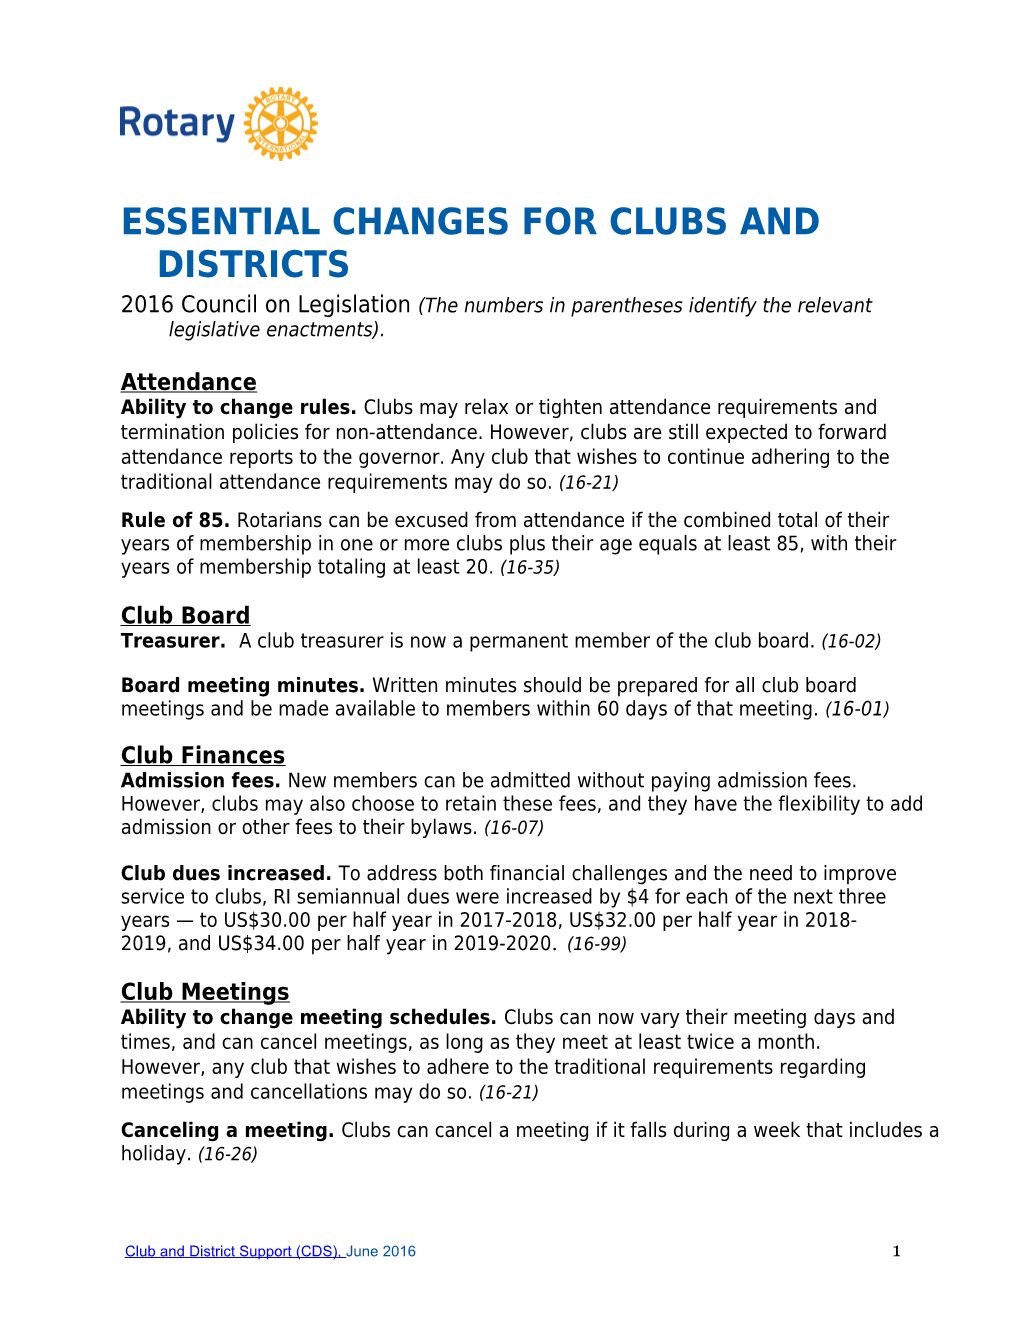 Essential Changes for Clubs and Districts